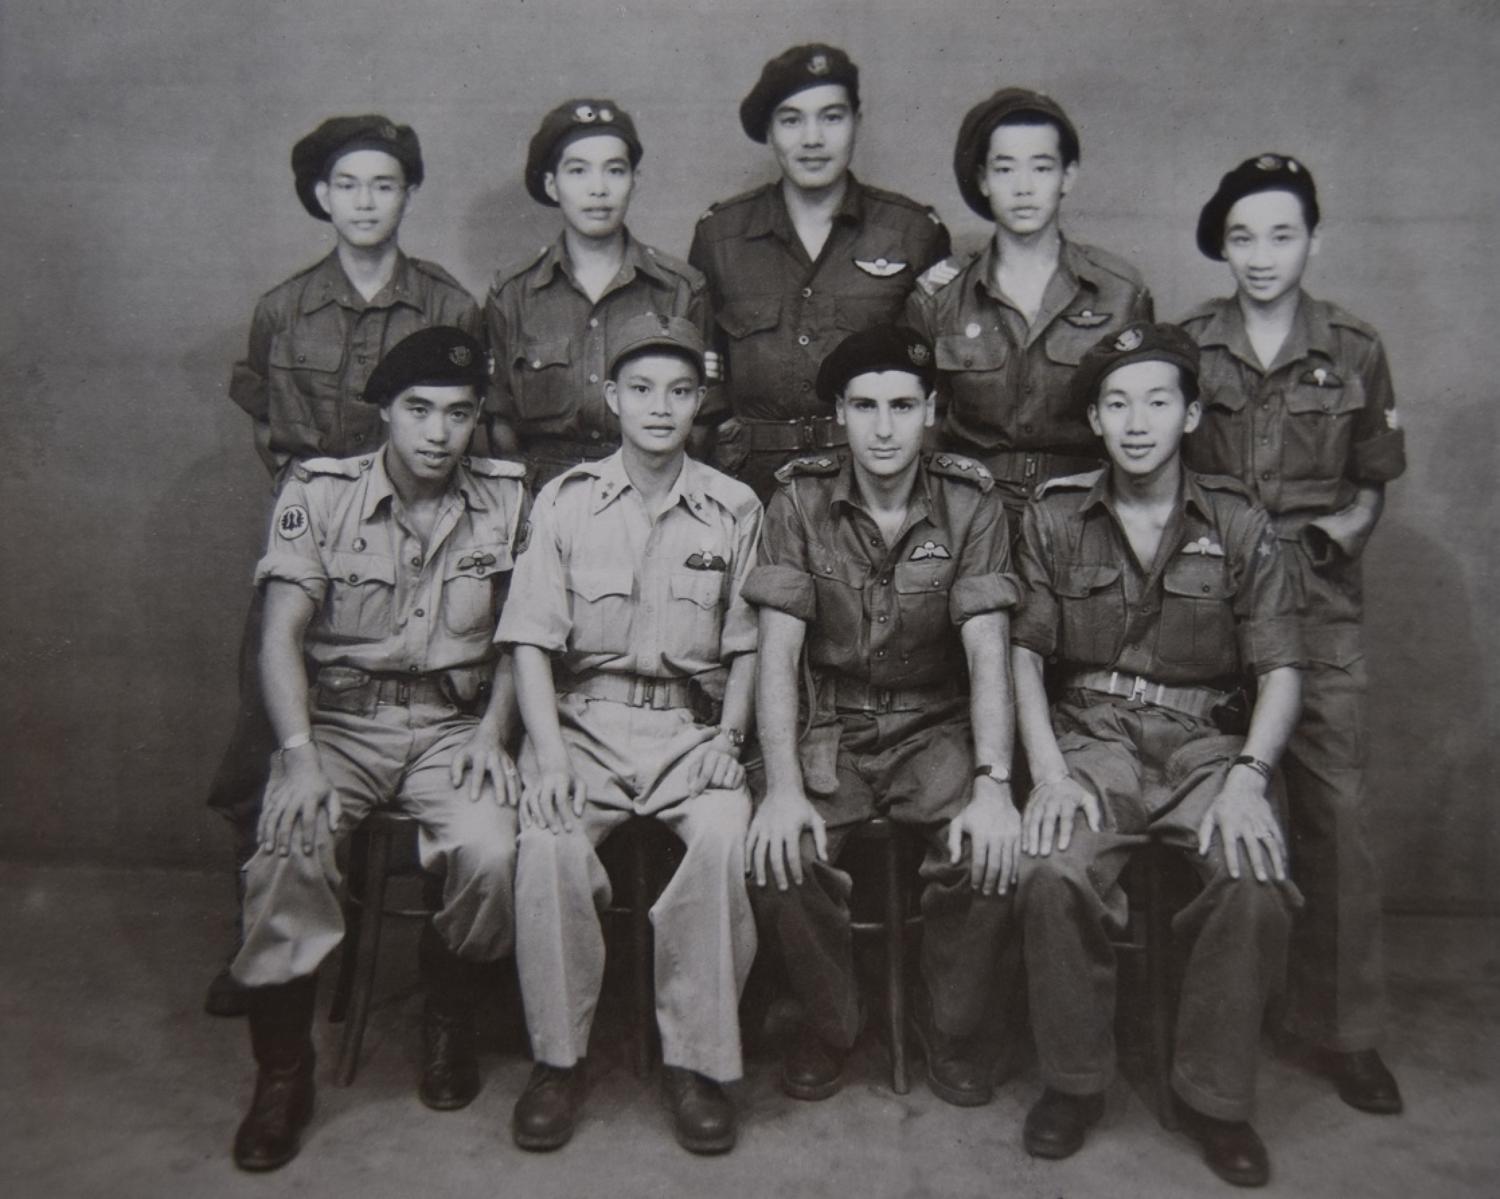 Photo of Force 136 members and others in Kuala Lumpur, in 1945. Back row (left to right): Unknown soldier, Bing Lee, Ernie Louie, Harry Ho, Bill Lee. Front row: Ted Wong, Chinese Nationalist soldier, Mike Levy, Henry Fung.